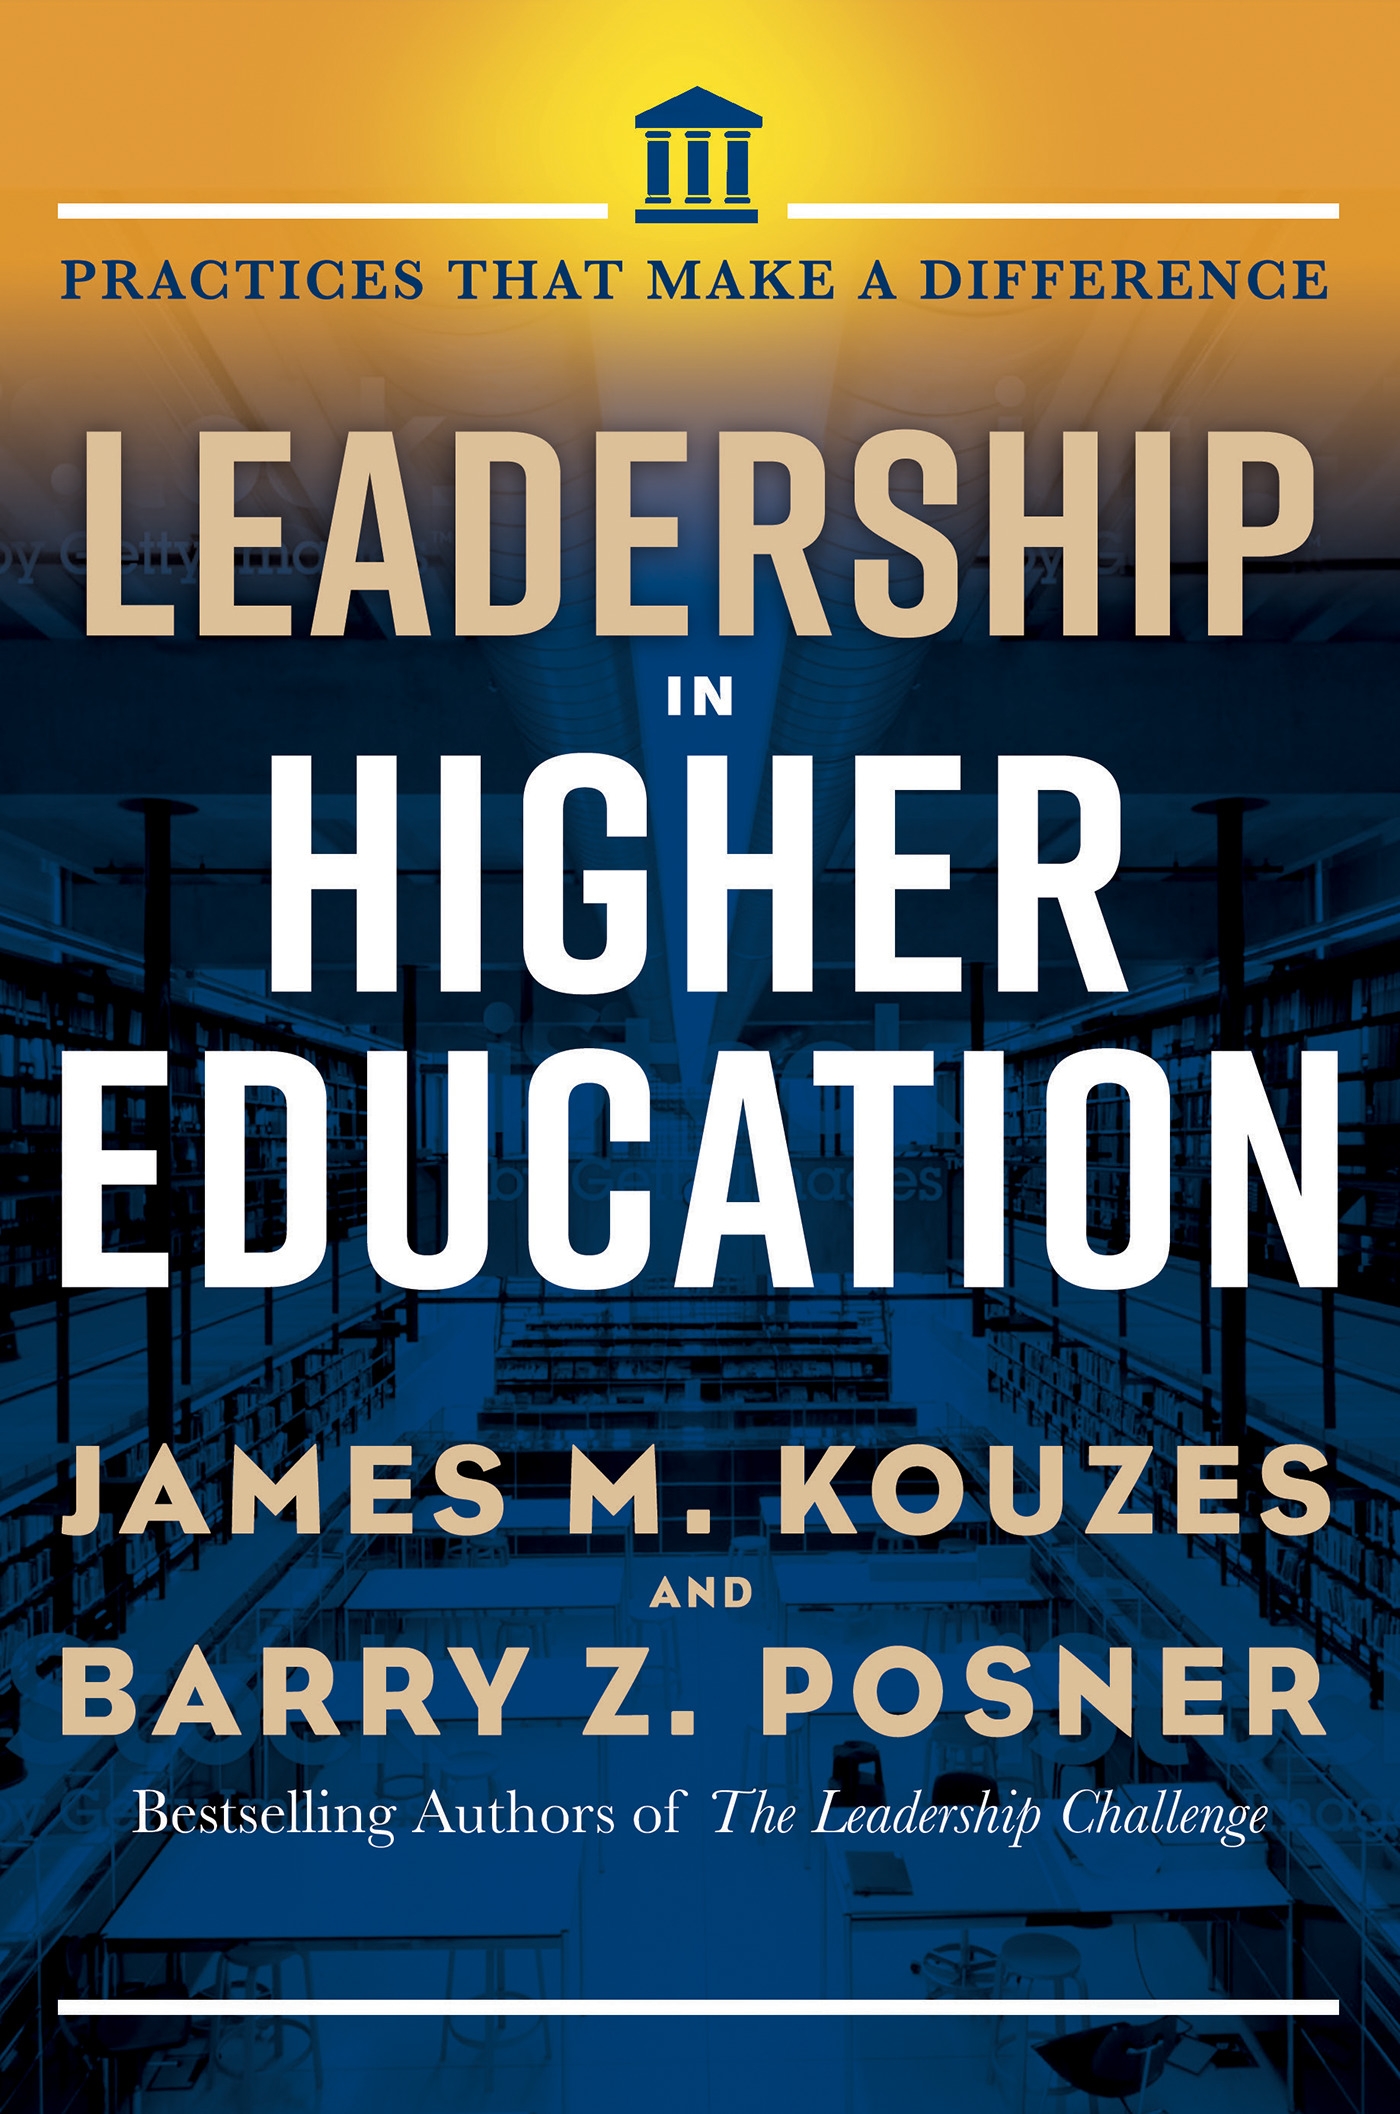 leadership in education scholarly articles